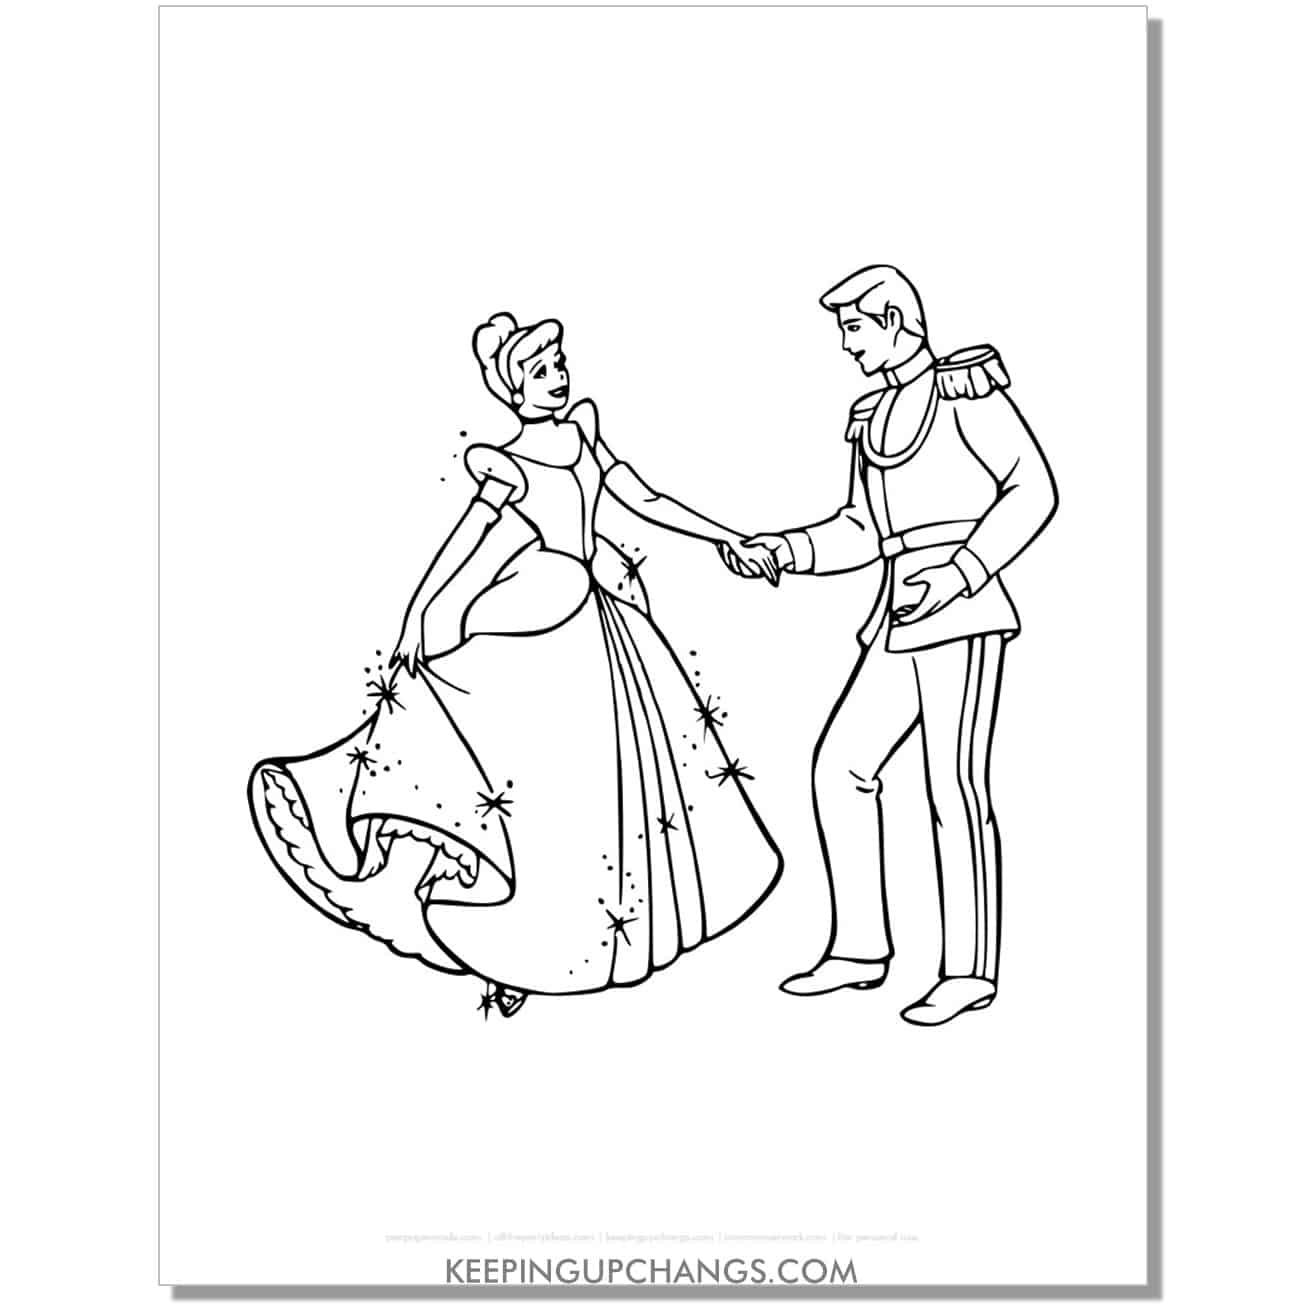 cinderella and prince charming dance coloring page, sheet.